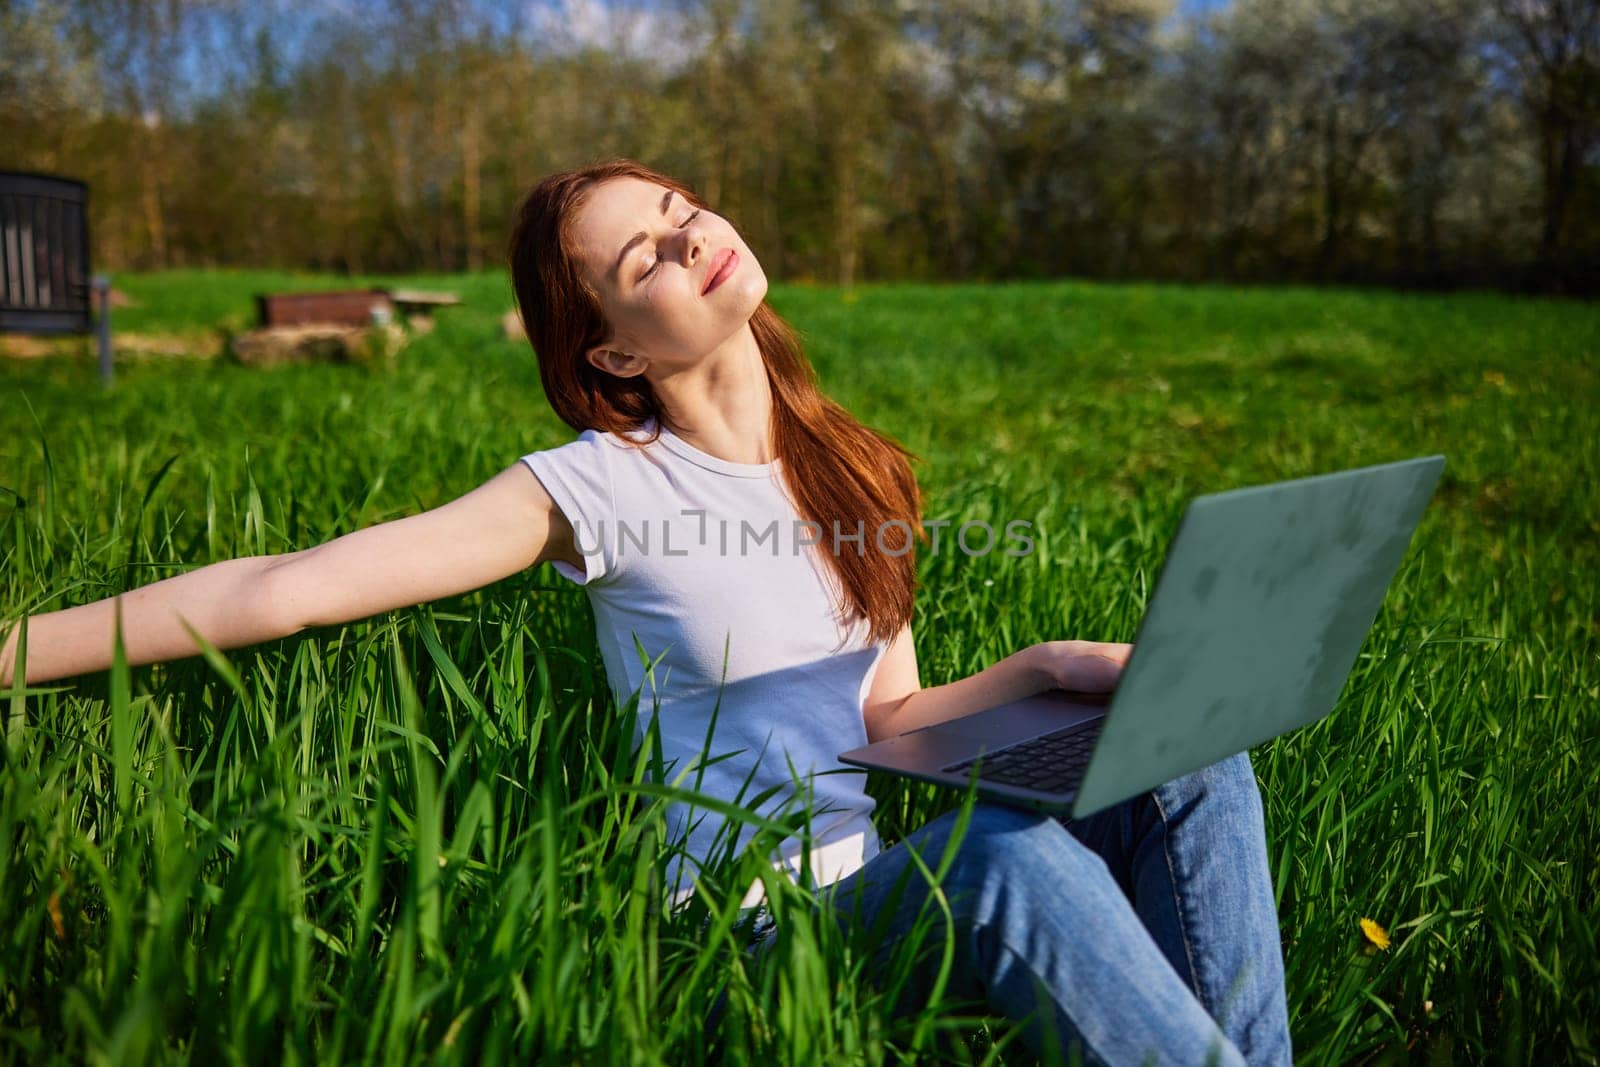 joyful woman works sitting in high grass behind a laptop raising her hand up. High quality photo